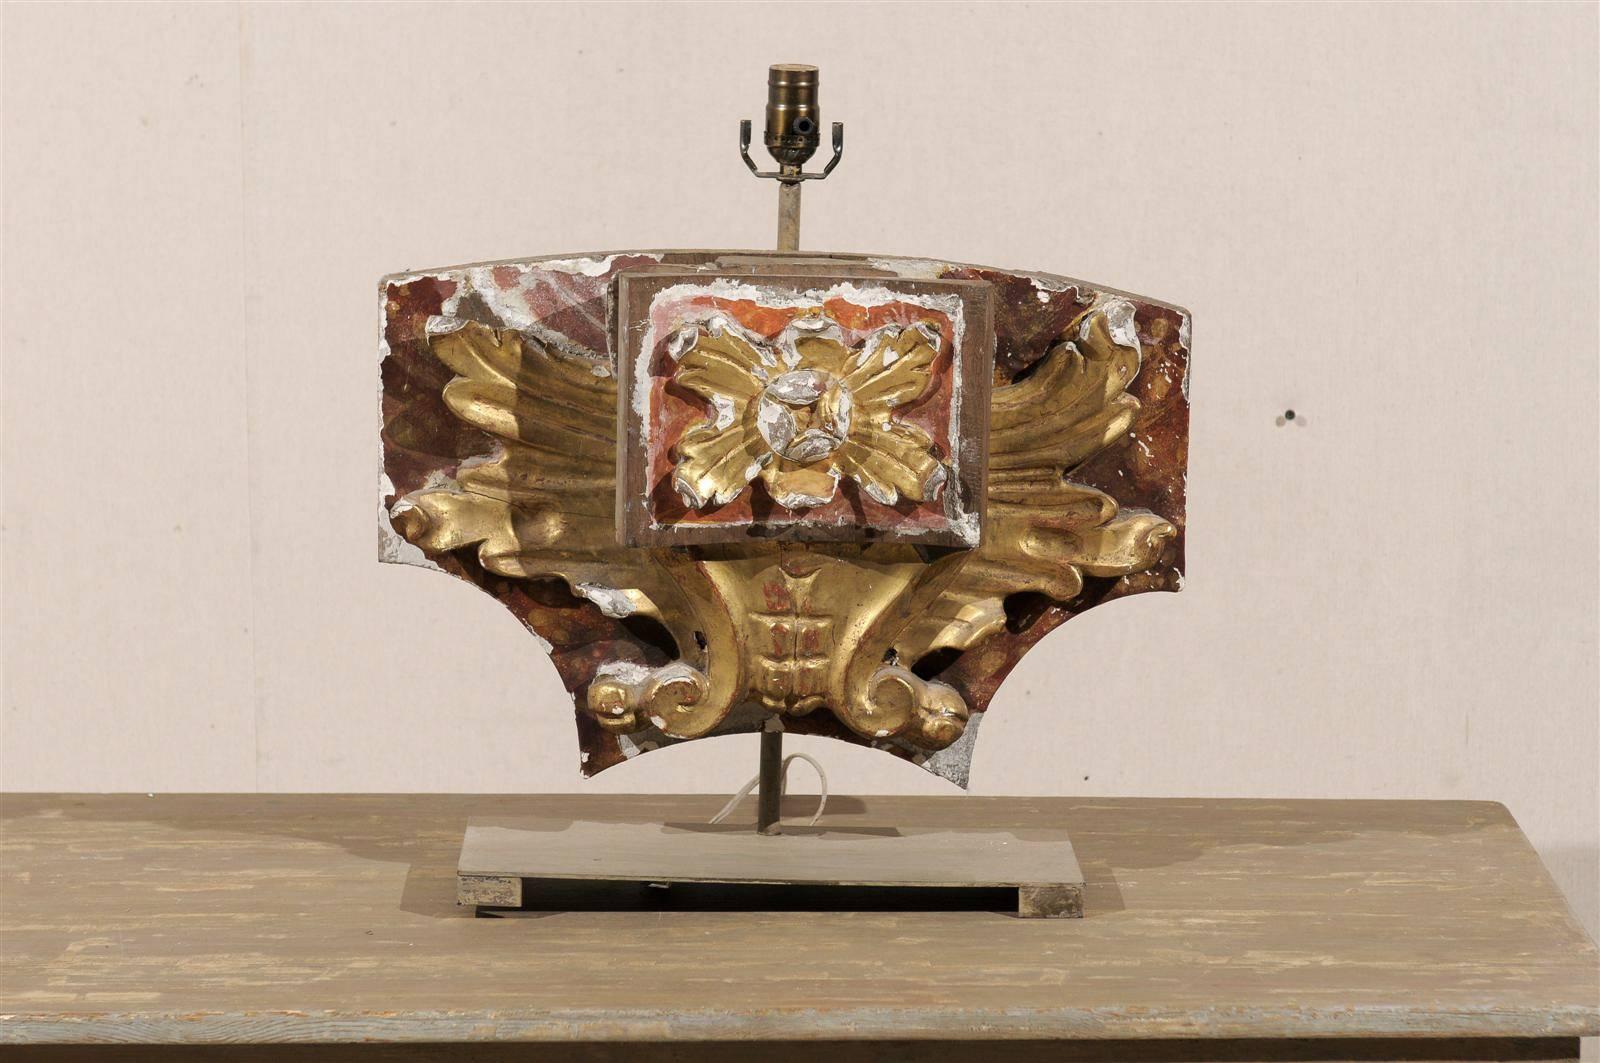 An Italian fragment made into a single table lamp from the early 20th century. This Italian fragment lamp features a central carved wood motif with giltwood flower on red painted background, over a second layer of gilded ornament. This fragment has